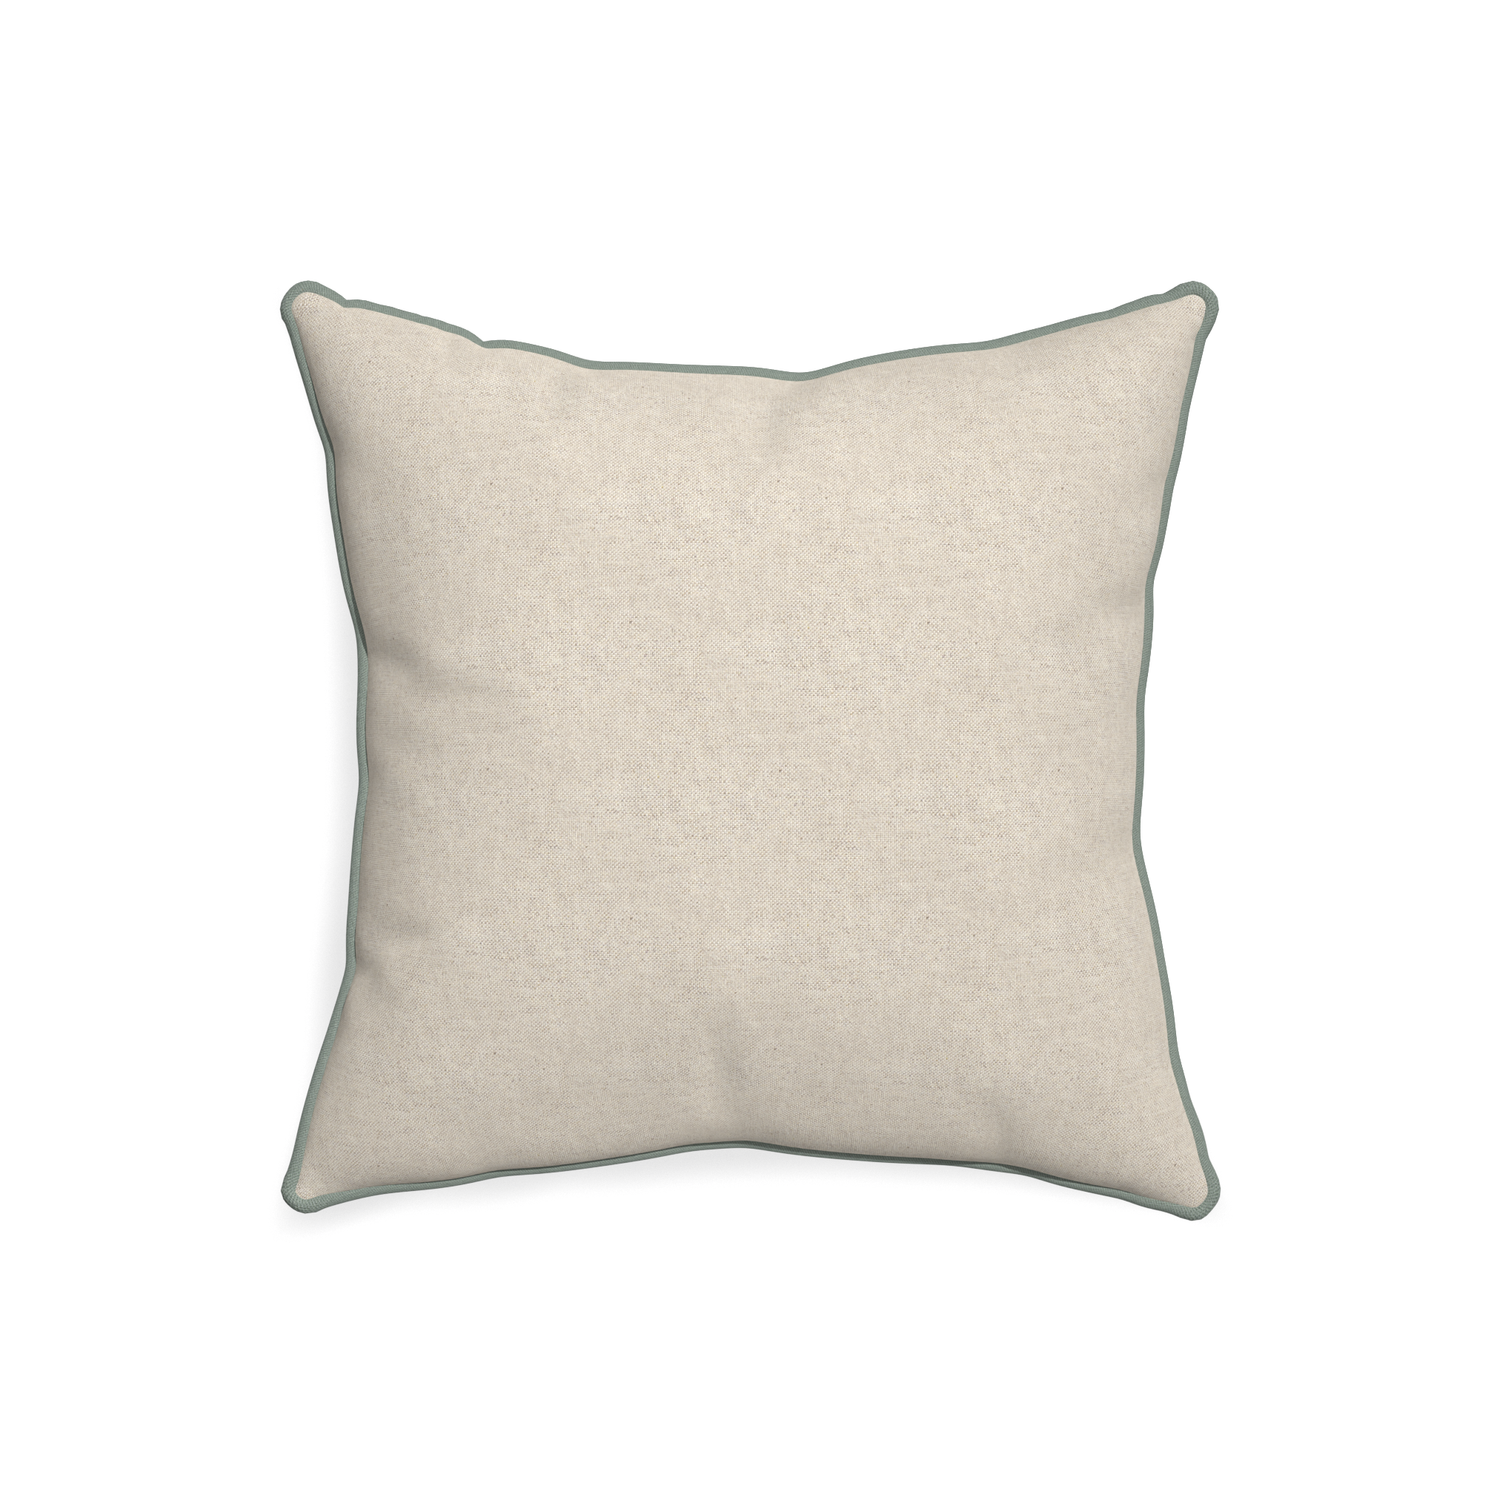 20-square oat custom light brownpillow with sage piping on white background